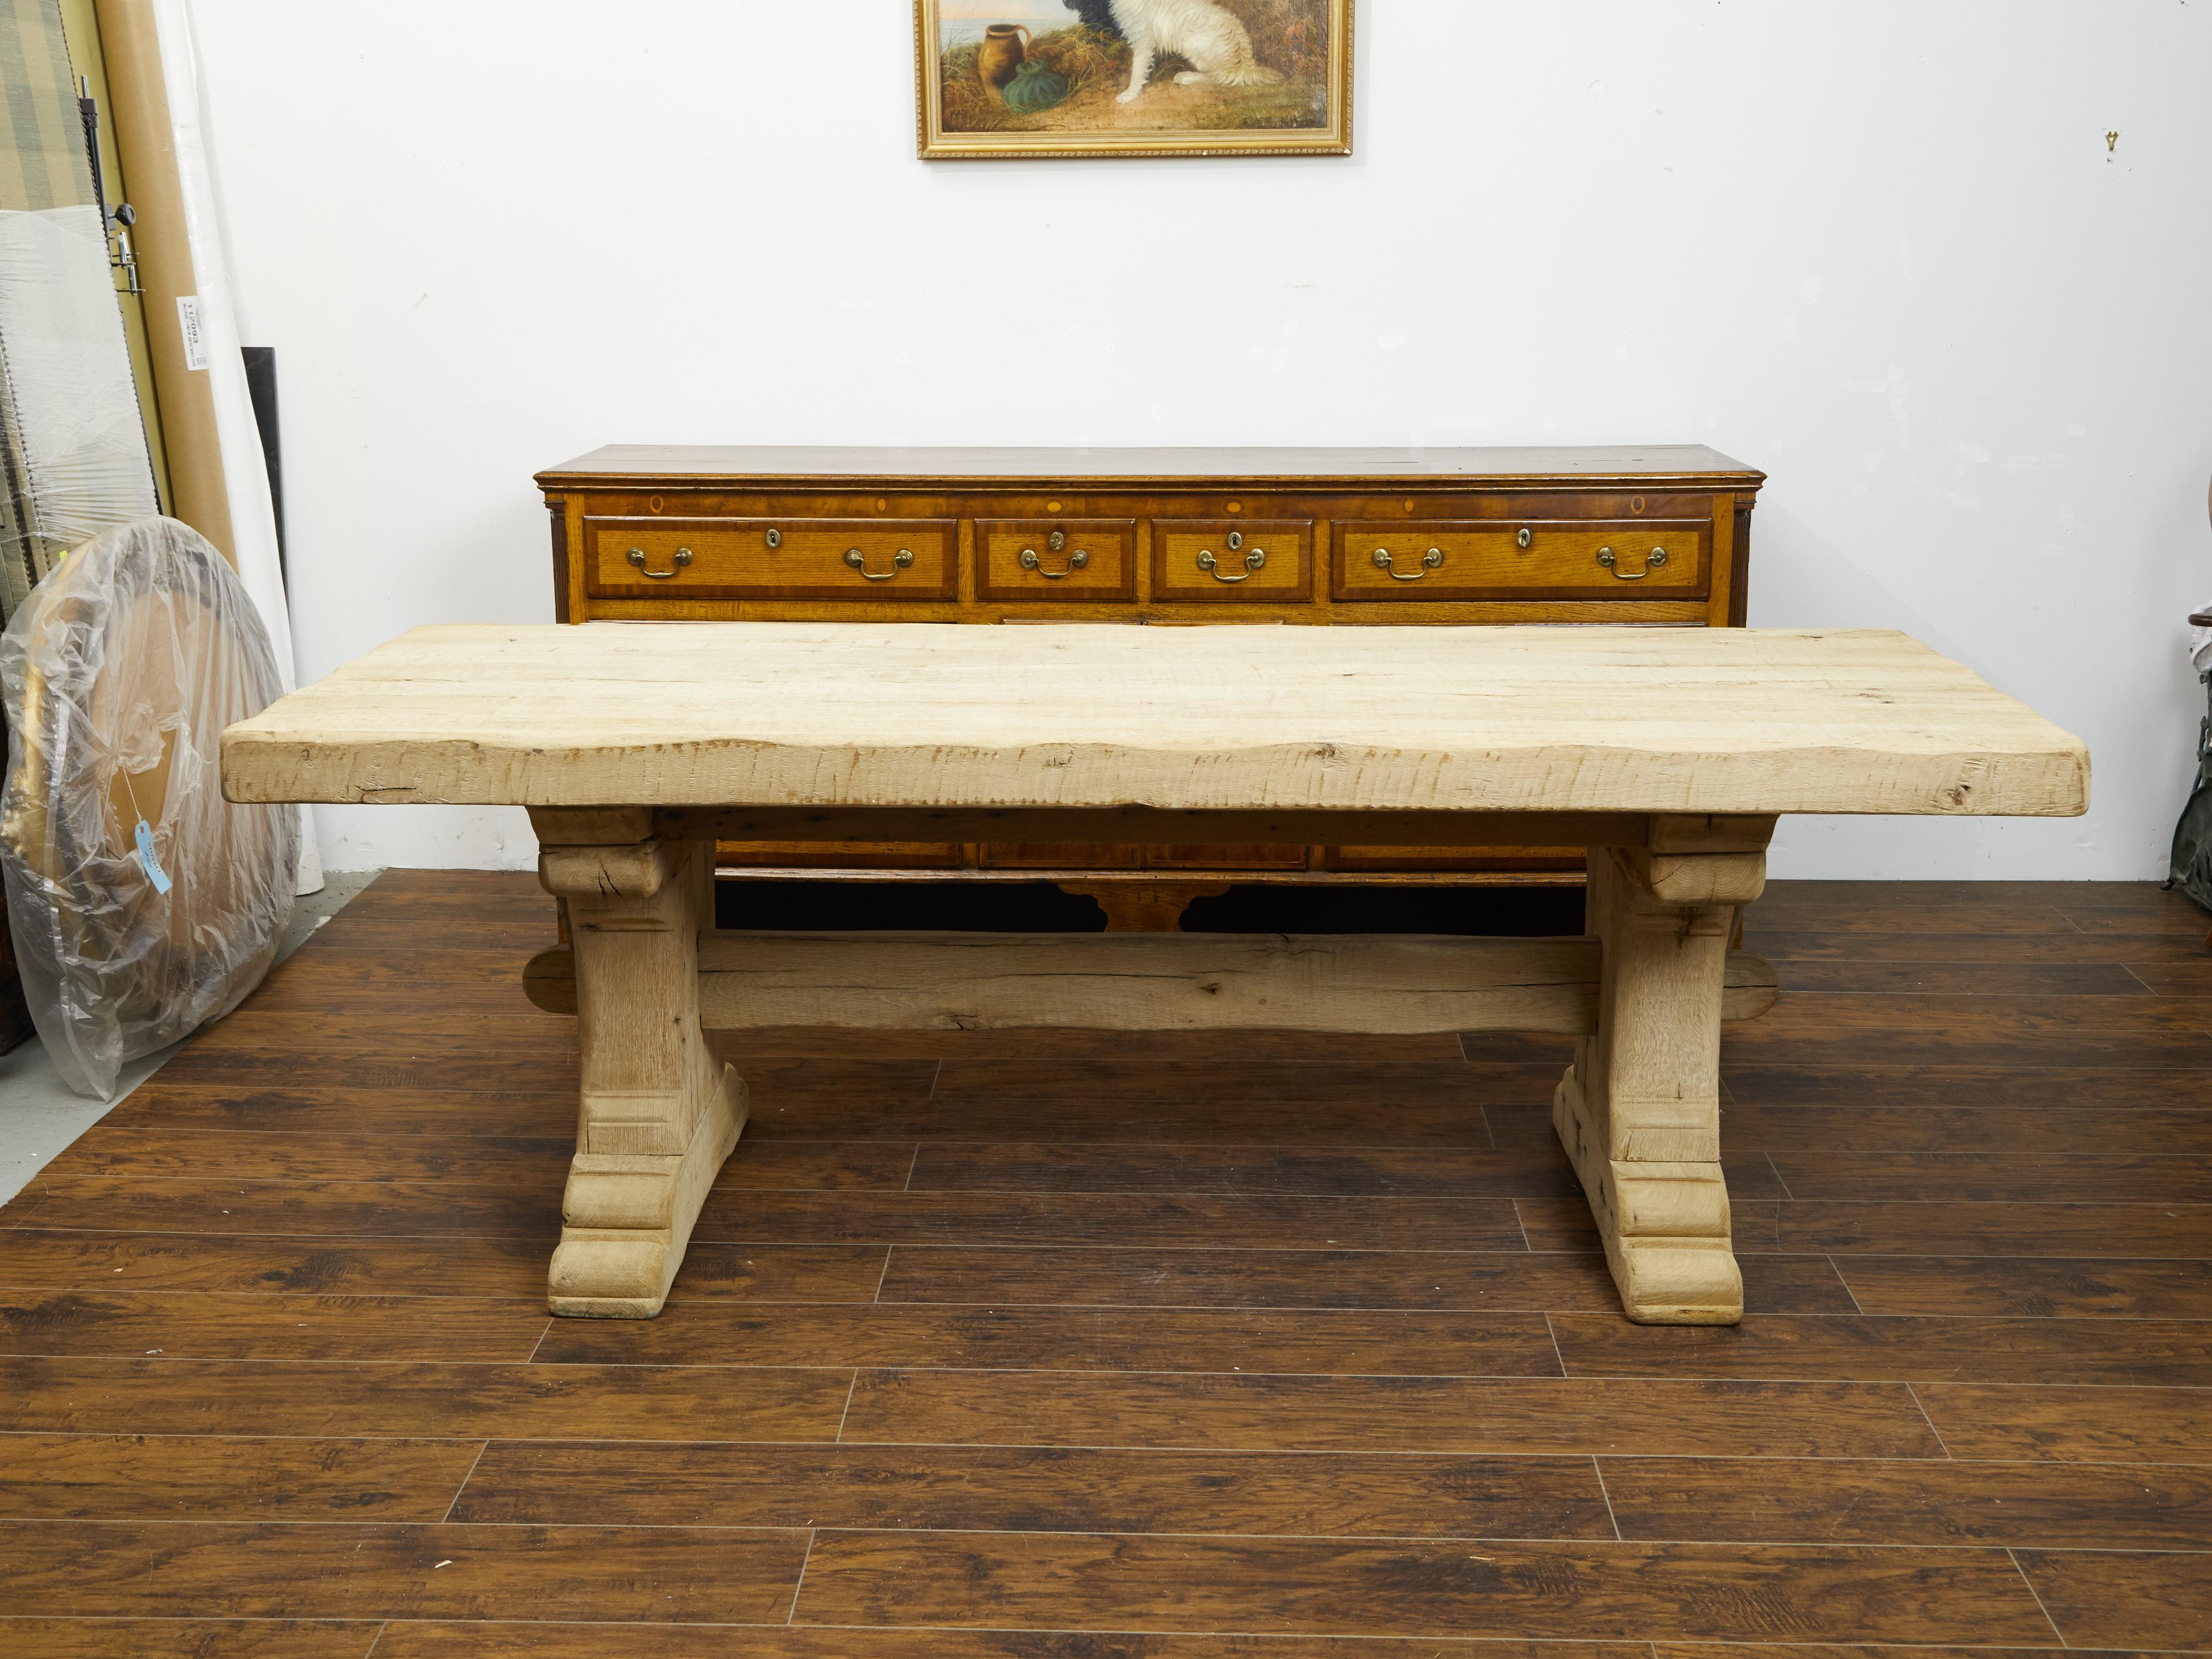 A French oak farm table from the late 19th century, with trestle base and natural patina. Created in France during the last quarter of the 19th century, this trestle table features a rectangular top sitting above a trestle base showing a nicely